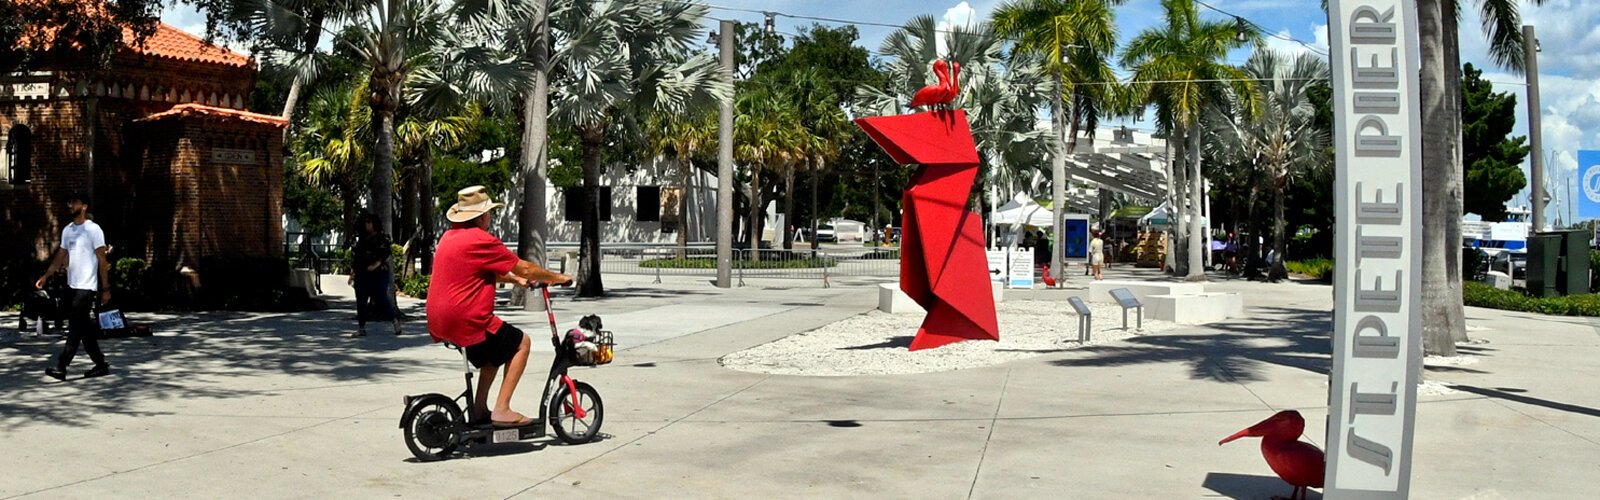  A visitor with a pooch in basket is greeted at the entrance of the St Pete Pier by the red pelicans from Nathan Mabry’s artwork “Myth." The pelican was declared St Petersburg’s official bird in 2020.